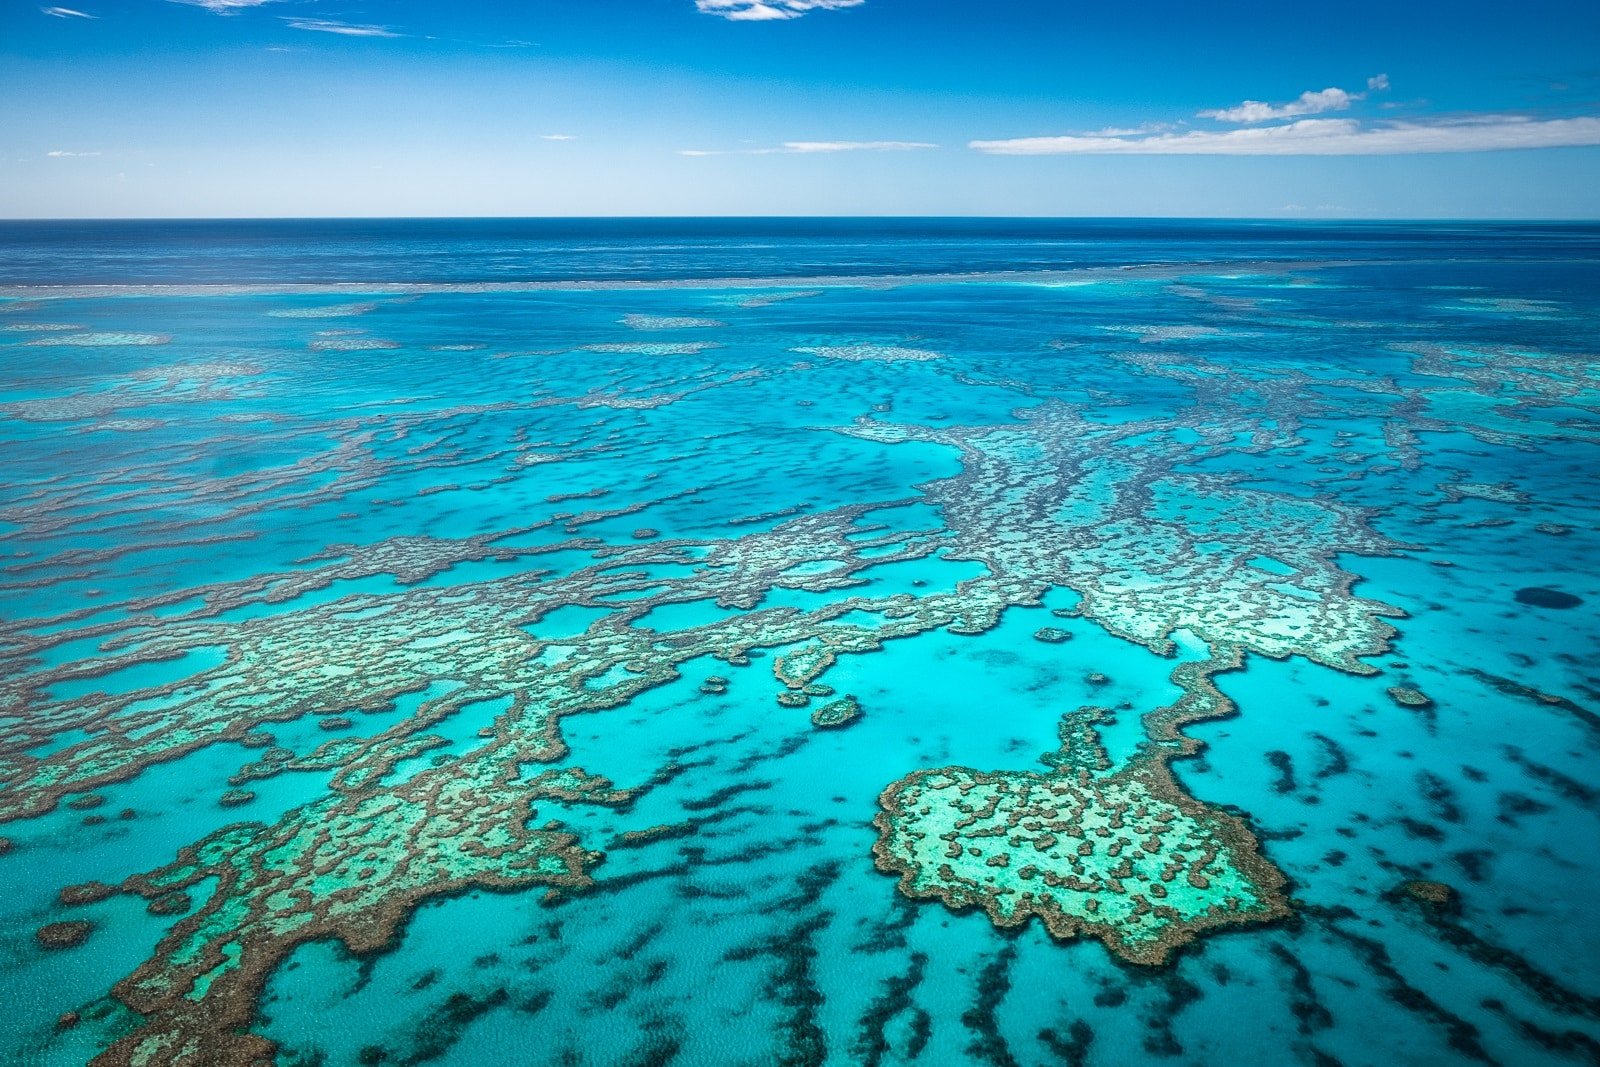 <p><span>Dive into the aquatic wonderland of the Great Barrier Reef, a marvel of the natural world off the coast of Queensland, Australia. This expansive coral reef system, visible from space, is a vibrant underwater universe teeming with diverse marine life.</span></p> <p><span>Immerse yourself in this kaleidoscope of color as you snorkel or dive among the coral gardens, encountering everything from tiny, colorful fish to majestic sea turtles and reef sharks. The reef offers a spectacular display of marine biodiversity and provides an insight into the fragility of our natural world, reminding us of the importance of conservation efforts.</span></p> <p><b>Insider’s Tip: </b><span>Opt for a liveaboard dive trip to explore the reef’s remote areas in-depth.</span></p> <p><b>When To Travel: </b><span>June to October provides great visibility and pleasant weather for diving and snorkeling.</span></p> <p><b>How To Get There: </b><span>Fly to Cairns or Townsville, where numerous tours to the reef are available.</span></p>